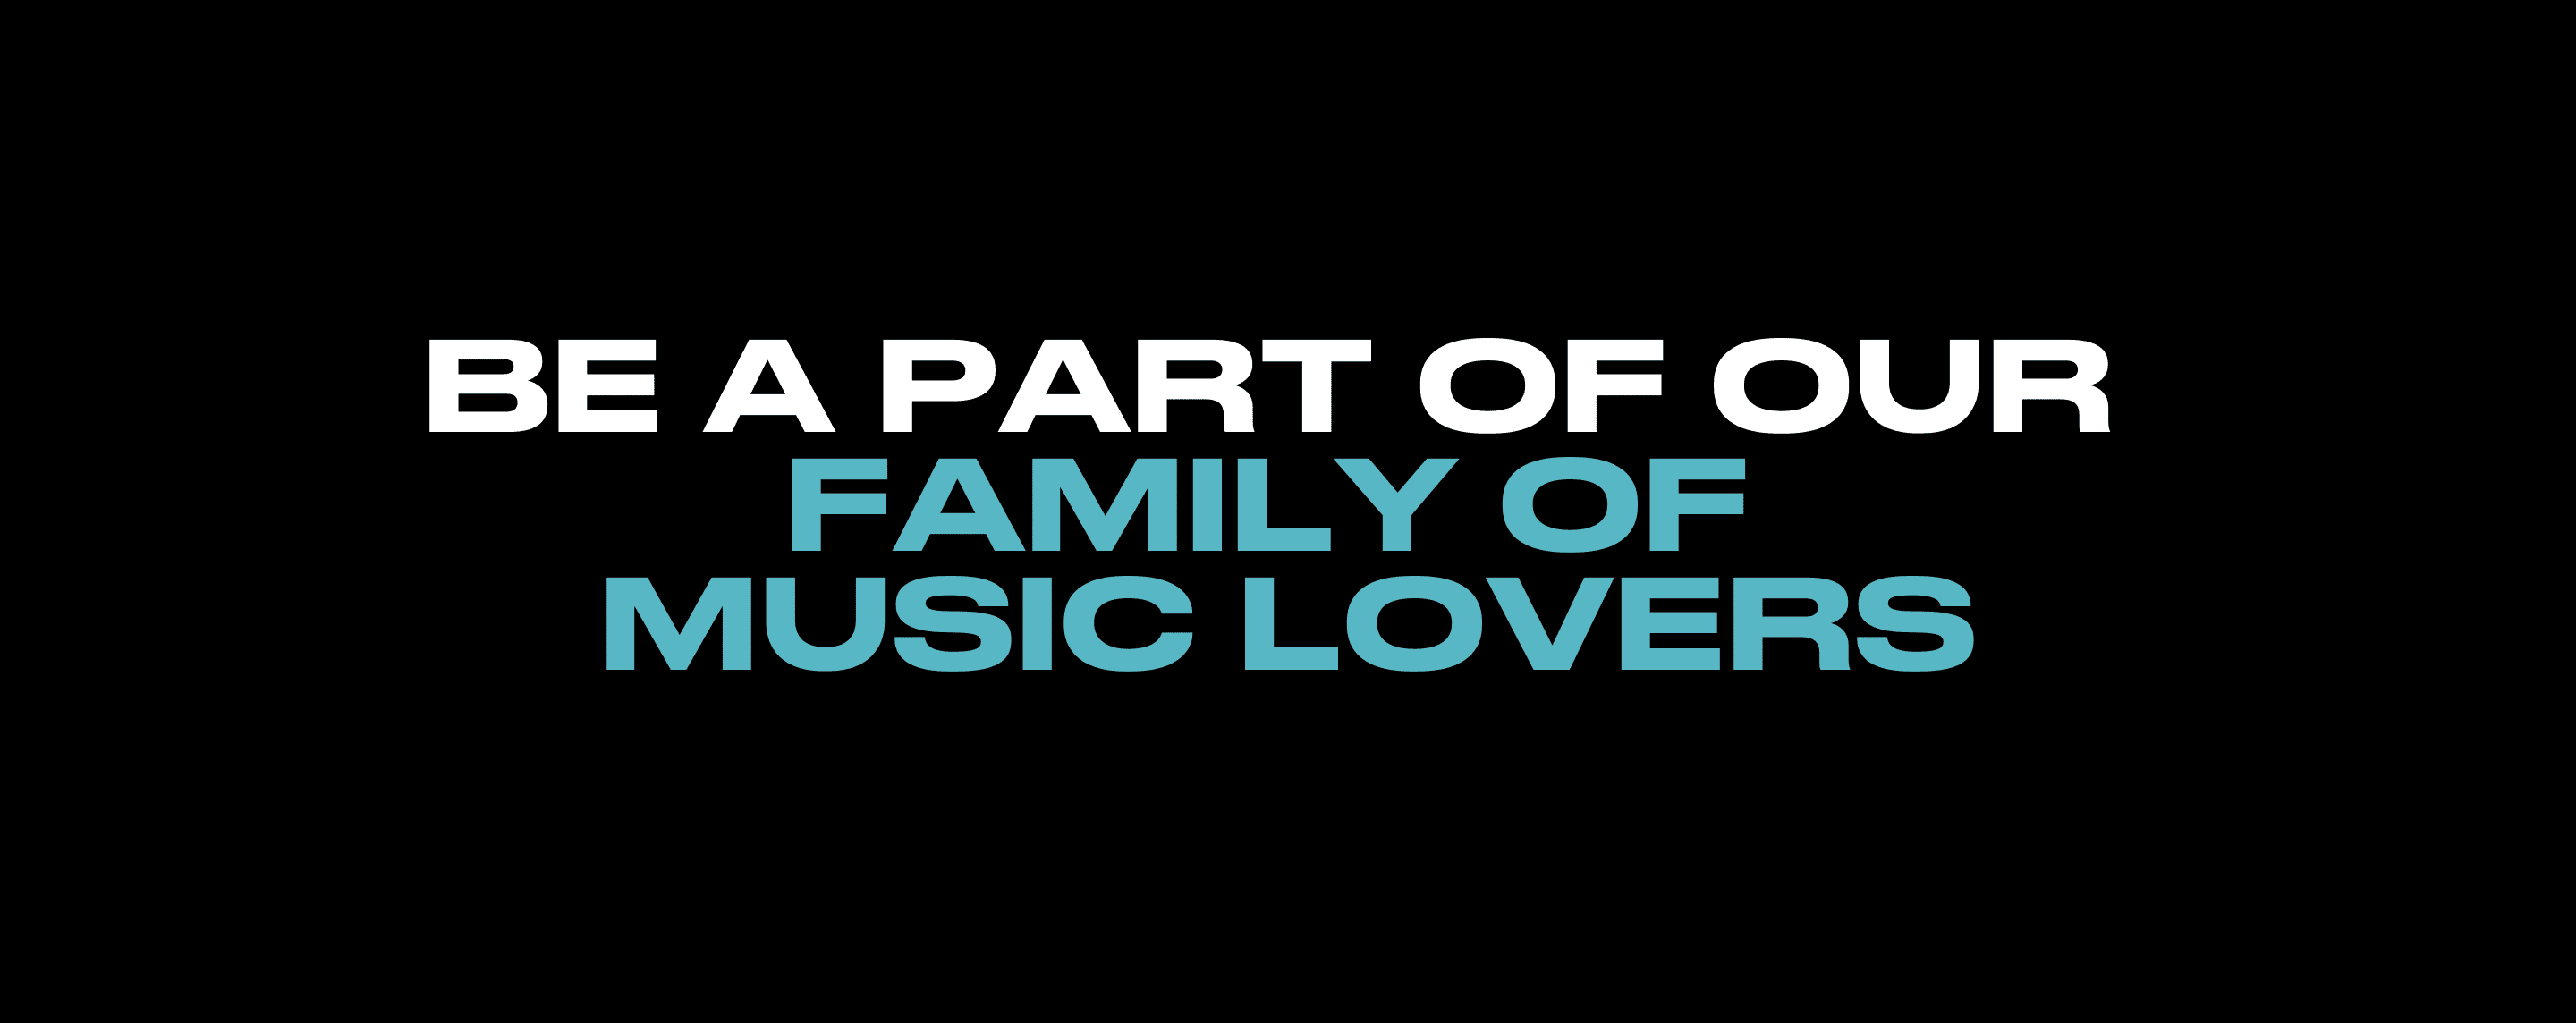 BE A PART OF OUR FAMILY OF MUSIC LOVERS